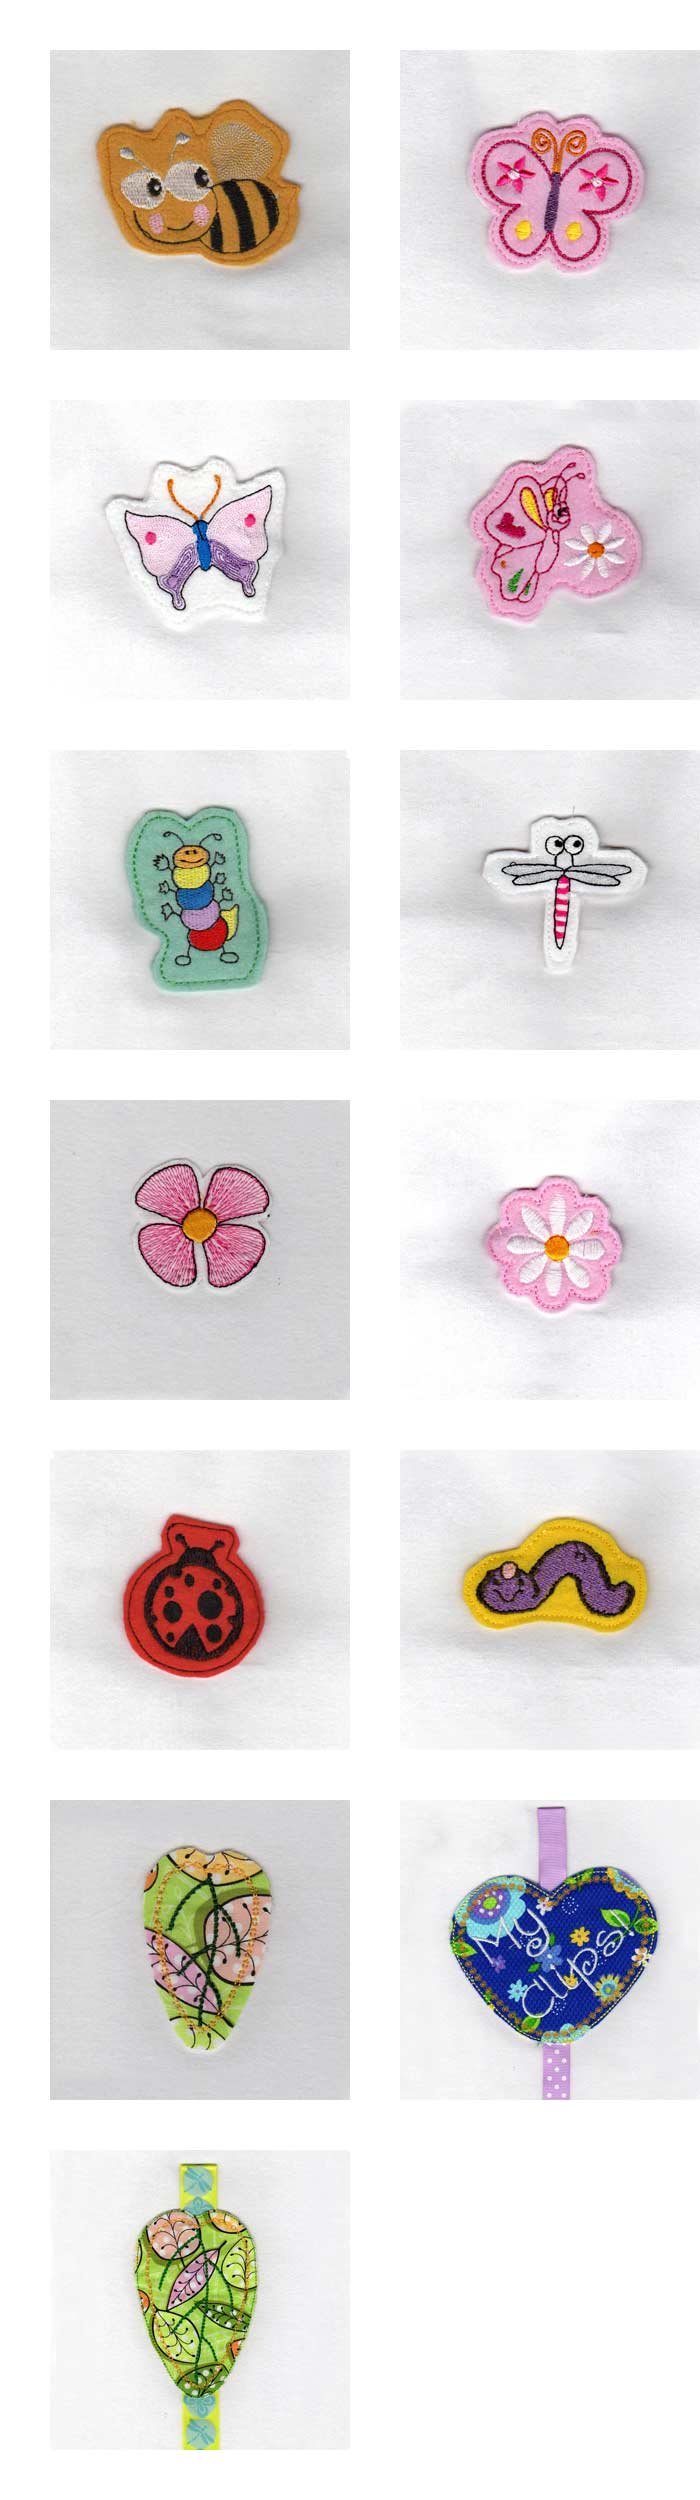 Girly Hair Clips Embroidery Machine Design Details